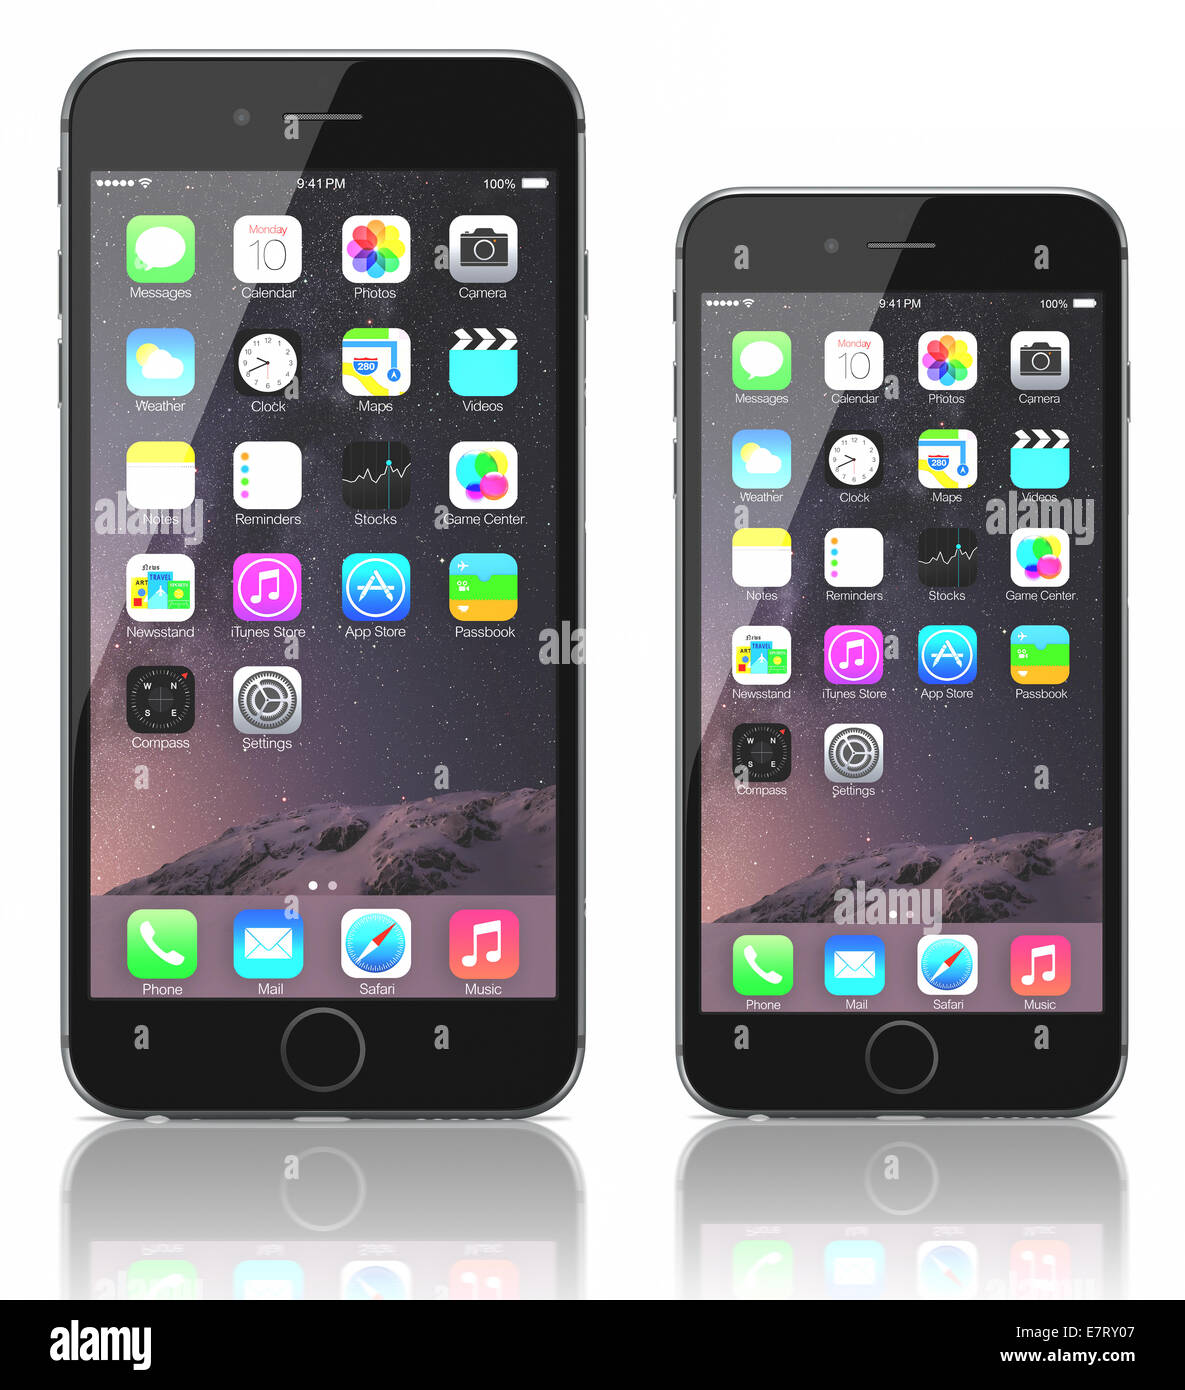 Apple Space Gray iPhone 6 Plus and iPhone 6 showing the home screen with iOS 8. Stock Photo